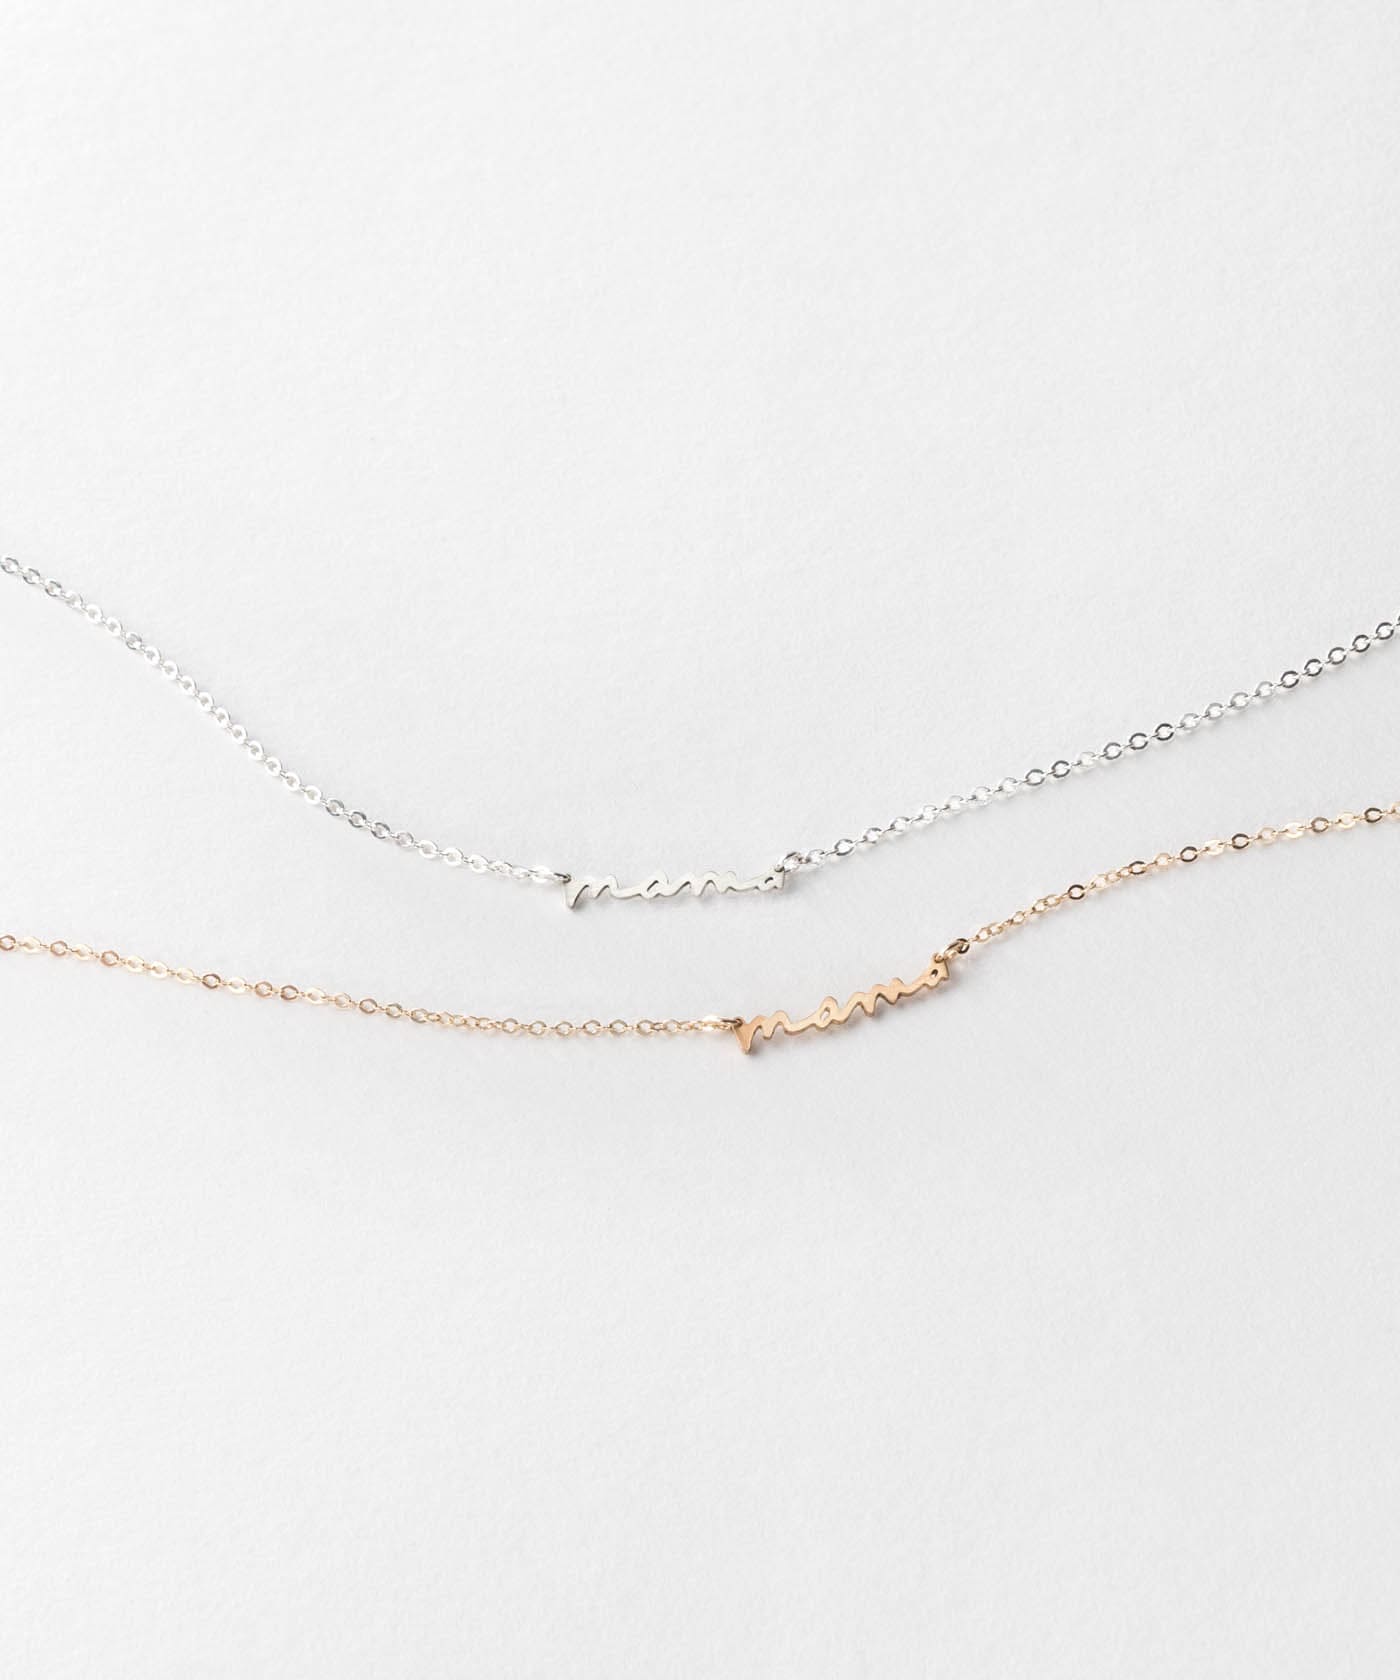 Mama Necklace, Mom Necklace, Dainty Mama Necklace, New Mom Gift, Gold  Minimal Necklace for Mom, Gift for Her - Etsy | Mama necklace, Mom necklace,  Necklace